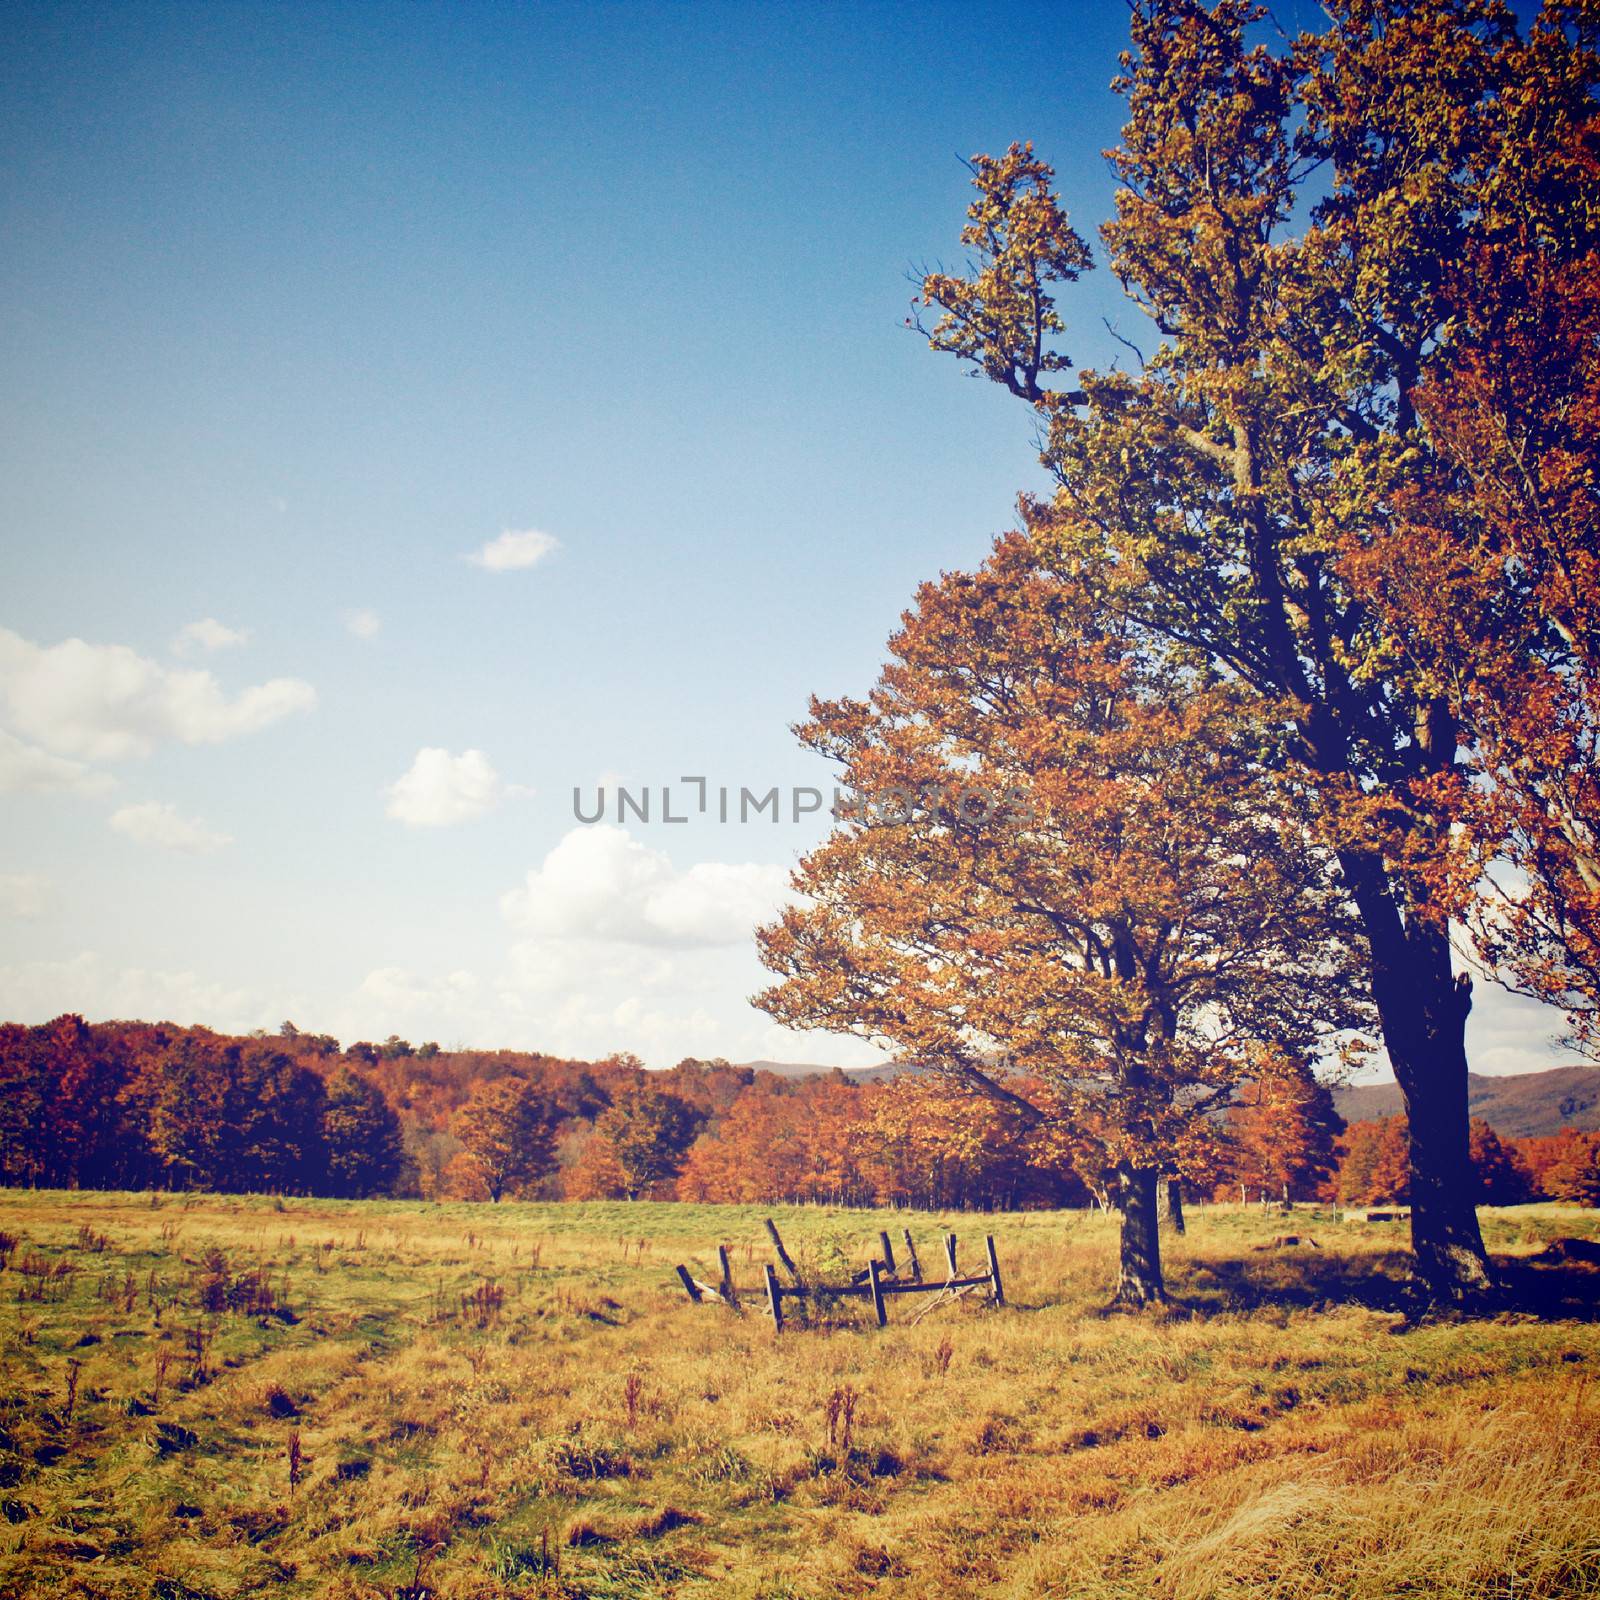 Welcome to autumn season with retro filter effect by nuchylee